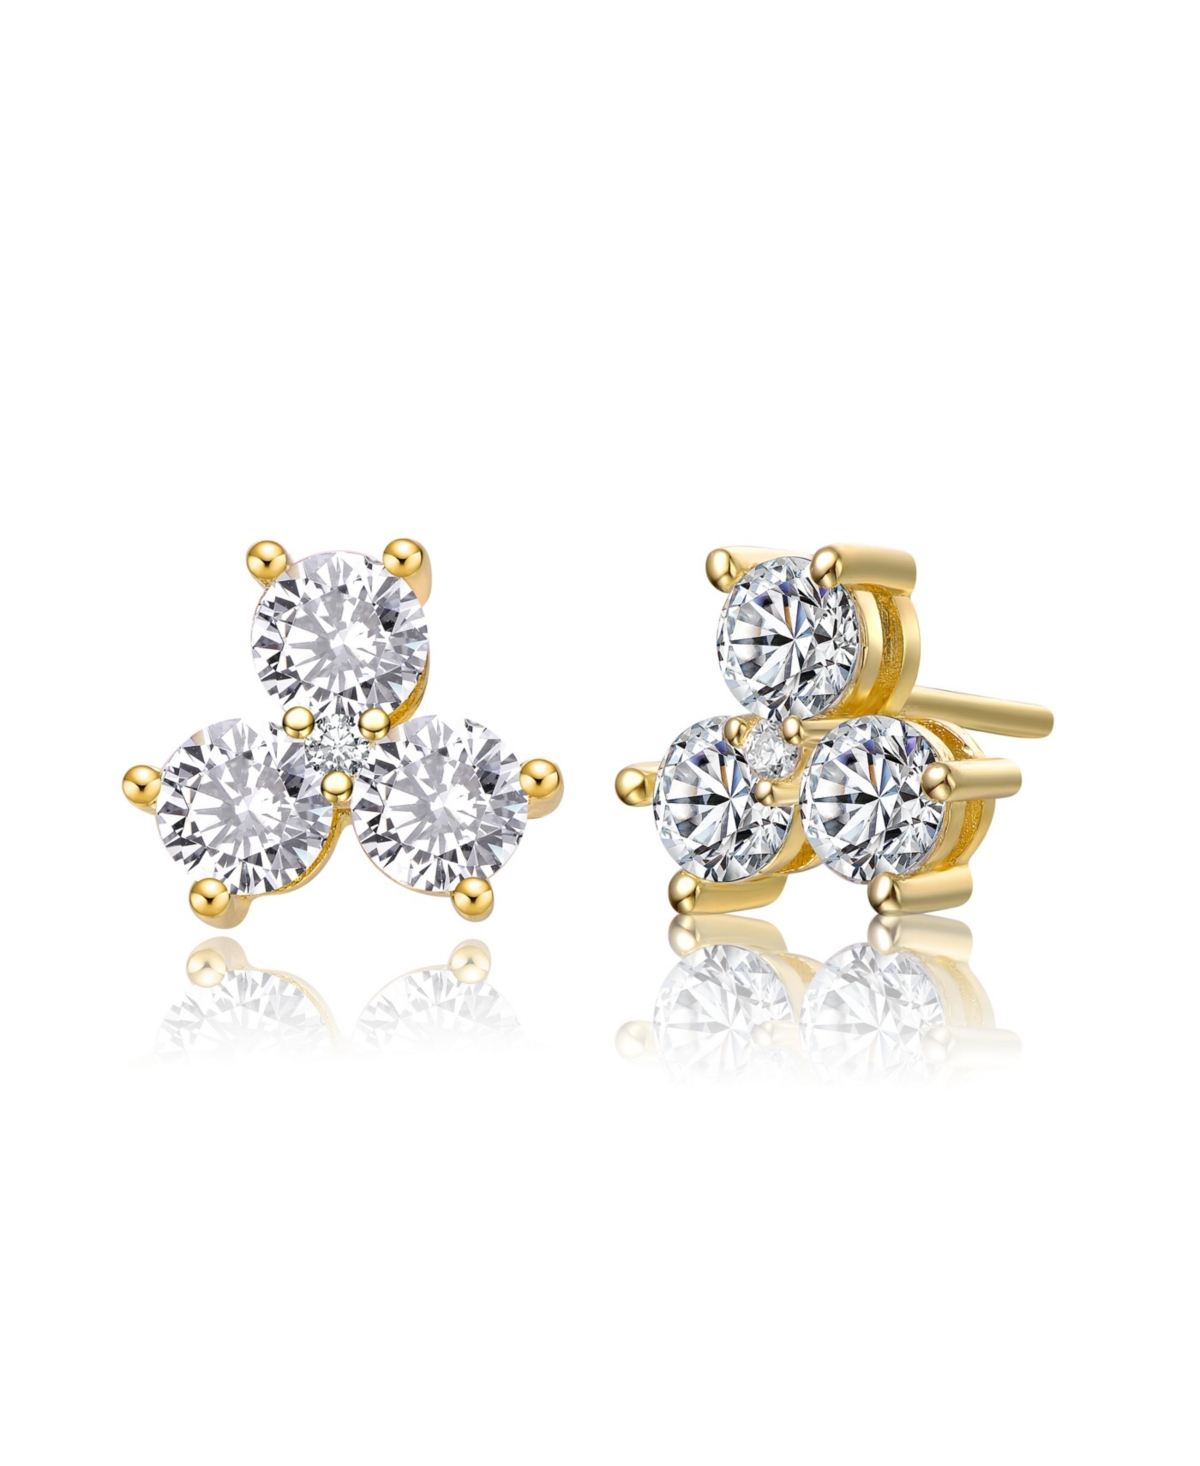 GENEVIVE STERLING SILVER WITH ROUND CUBIC ZIRCONIA CLOVER STUD EARRINGS